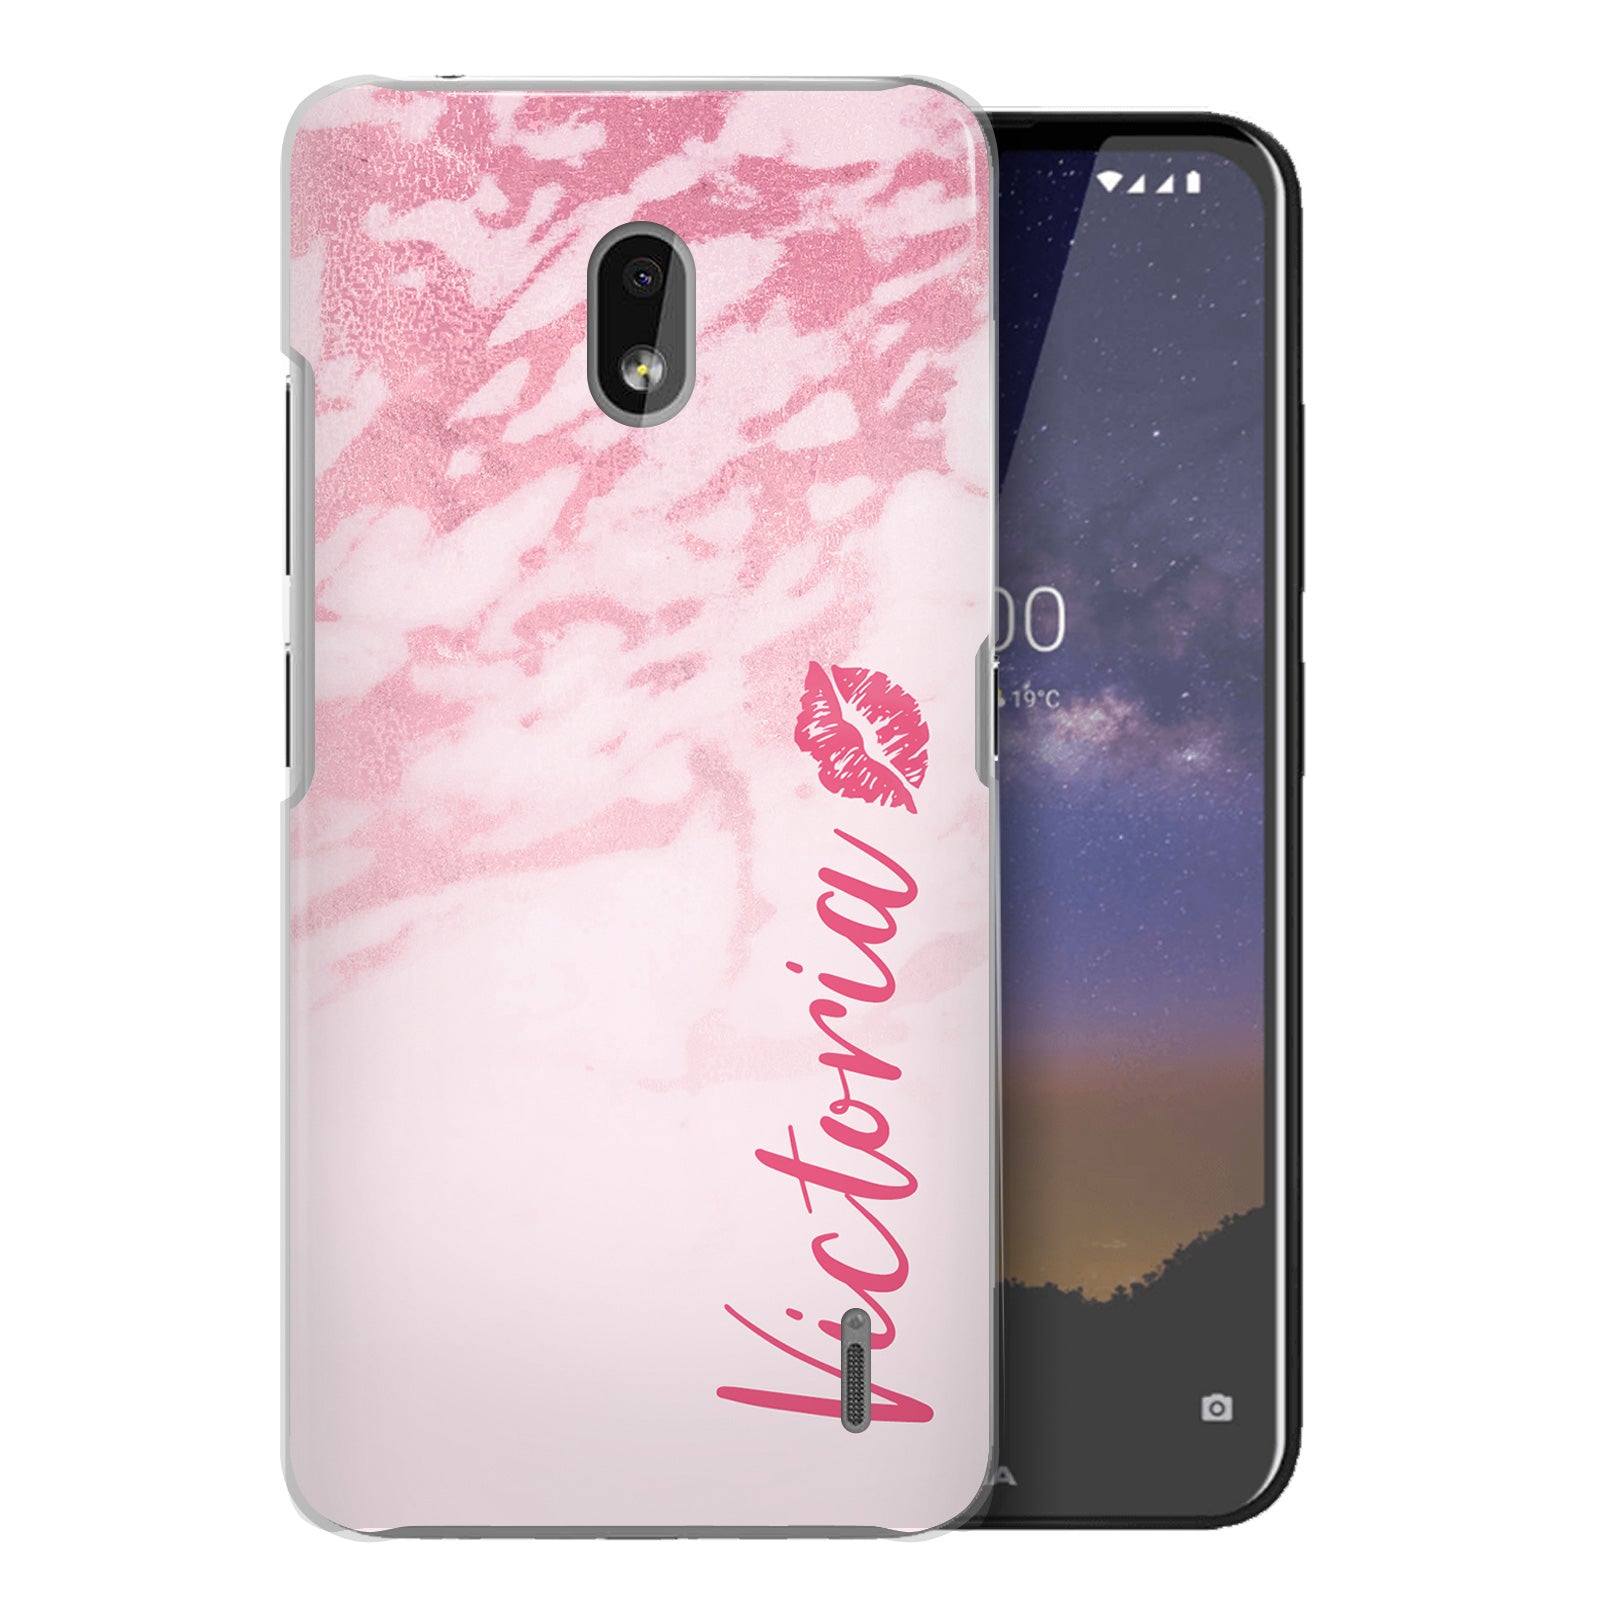 Personalised Nokia Hard Case - Pink Marble & Name Side Kiss